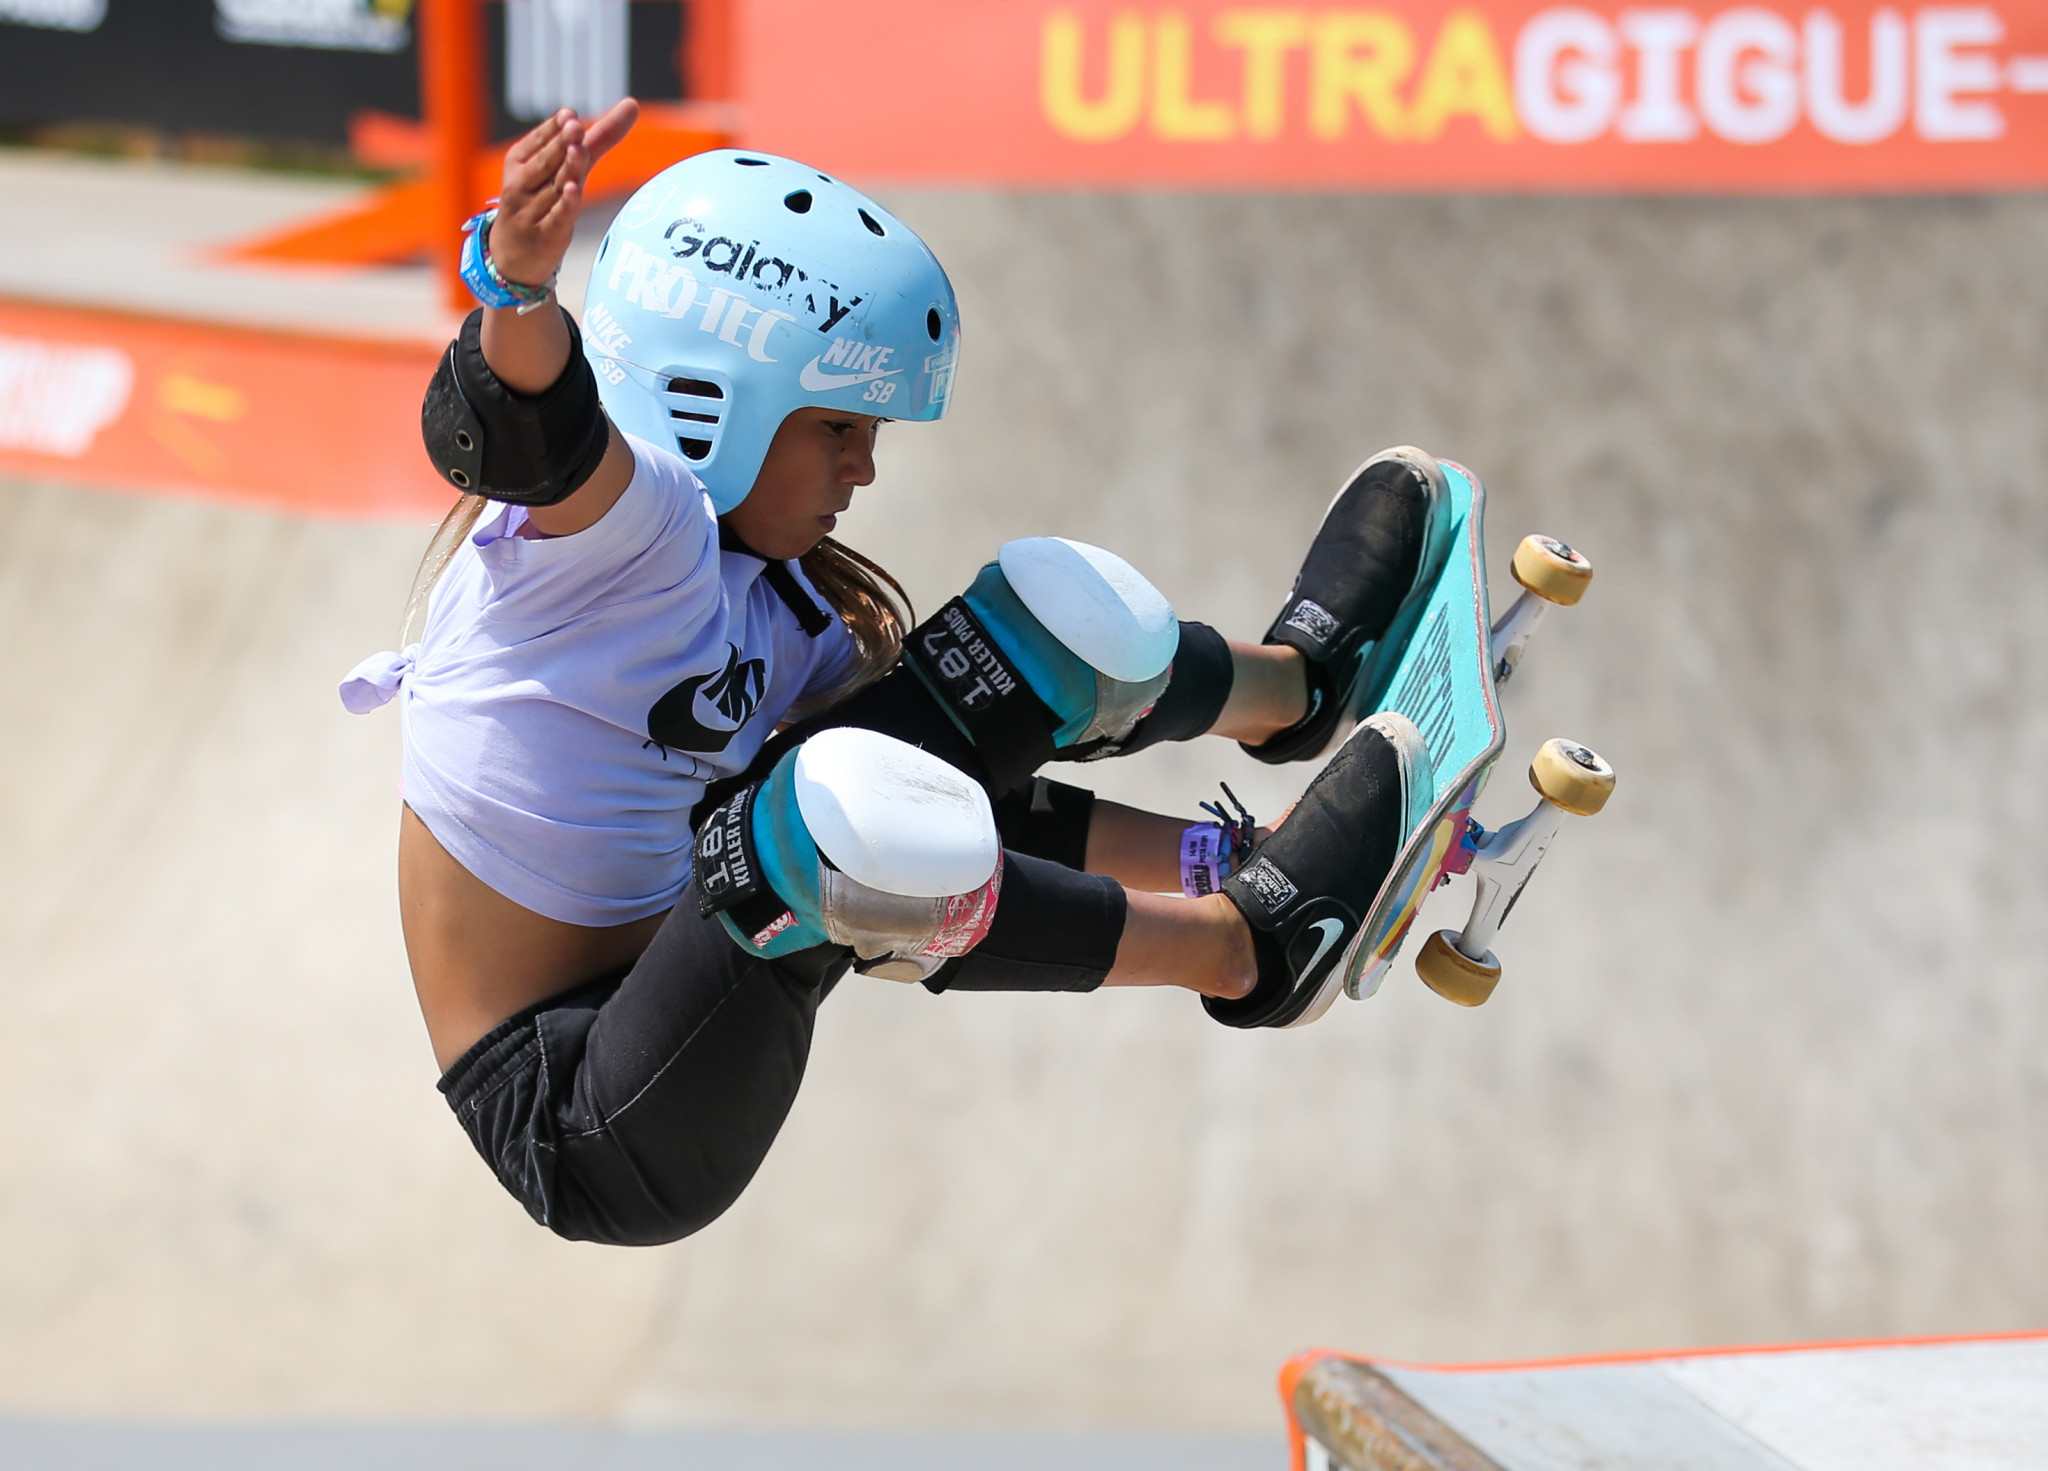 World Skate has suspended the World Skate Open Lima 2020 due to COVID-19 ©Getty Images